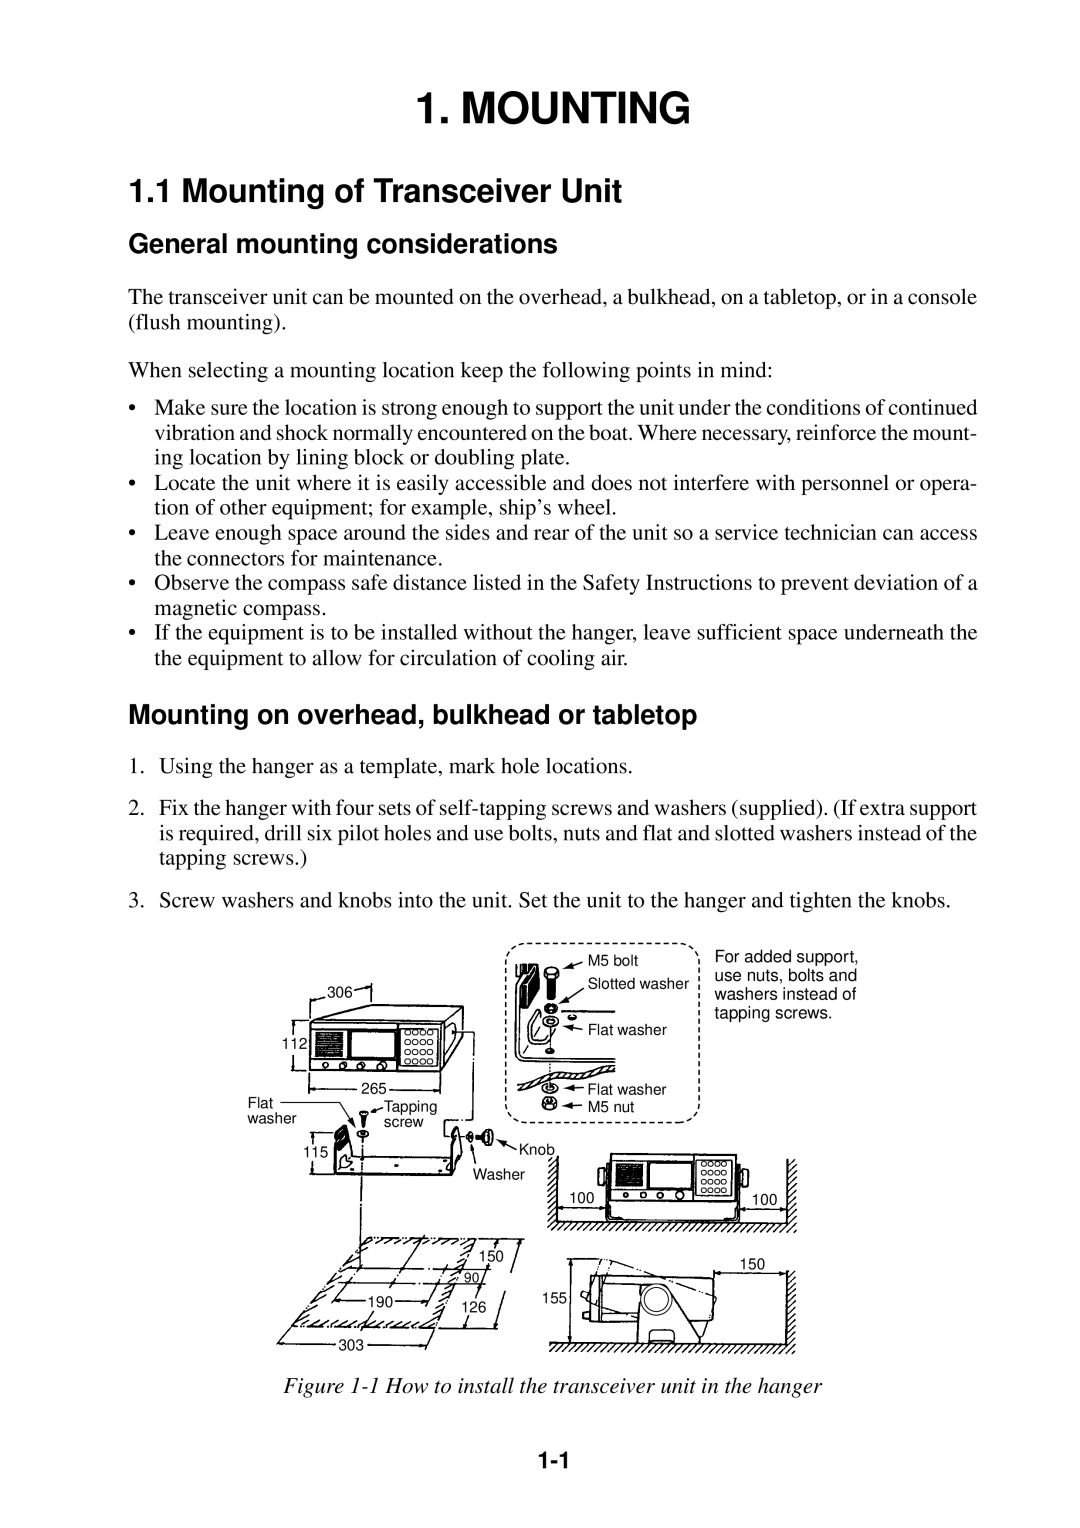 Furuno FS-1503 manual Mounting of Transceiver Unit, General mounting considerations 